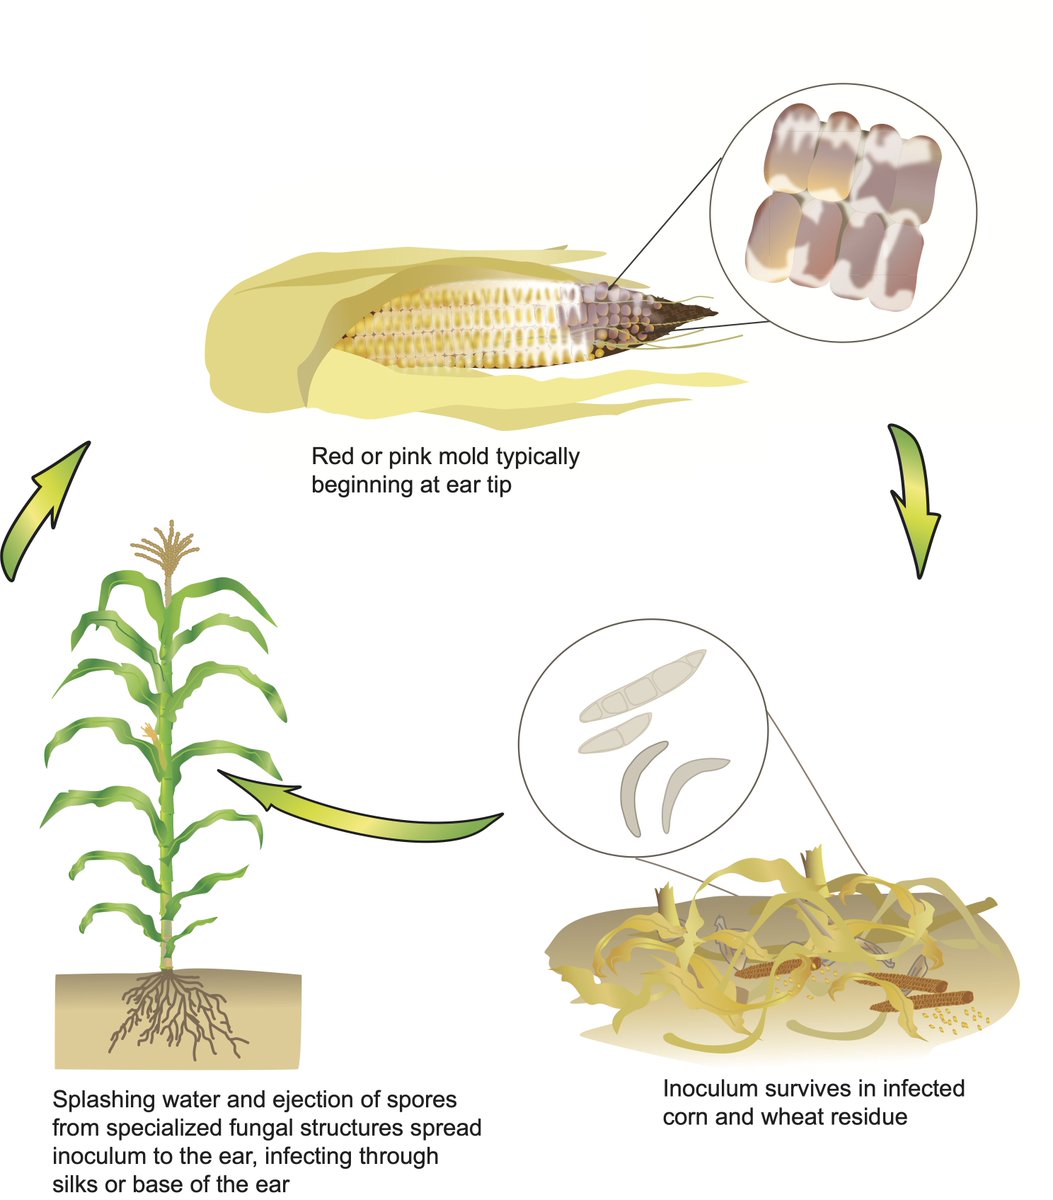 Got mold in your ears? Extension has a resource for #corn ear rots at cropprotectionnetwork.org/publications/a… @baldpathologist @travisfaske @txextension @tjcksn @dsmuelle @AlbertTenuta @cropdoc08 @MartinChilvers1 @NDSUcerealpath @KSU_CropDoc @TNplantDR @UMNExt @VACoopExt @CUESNews